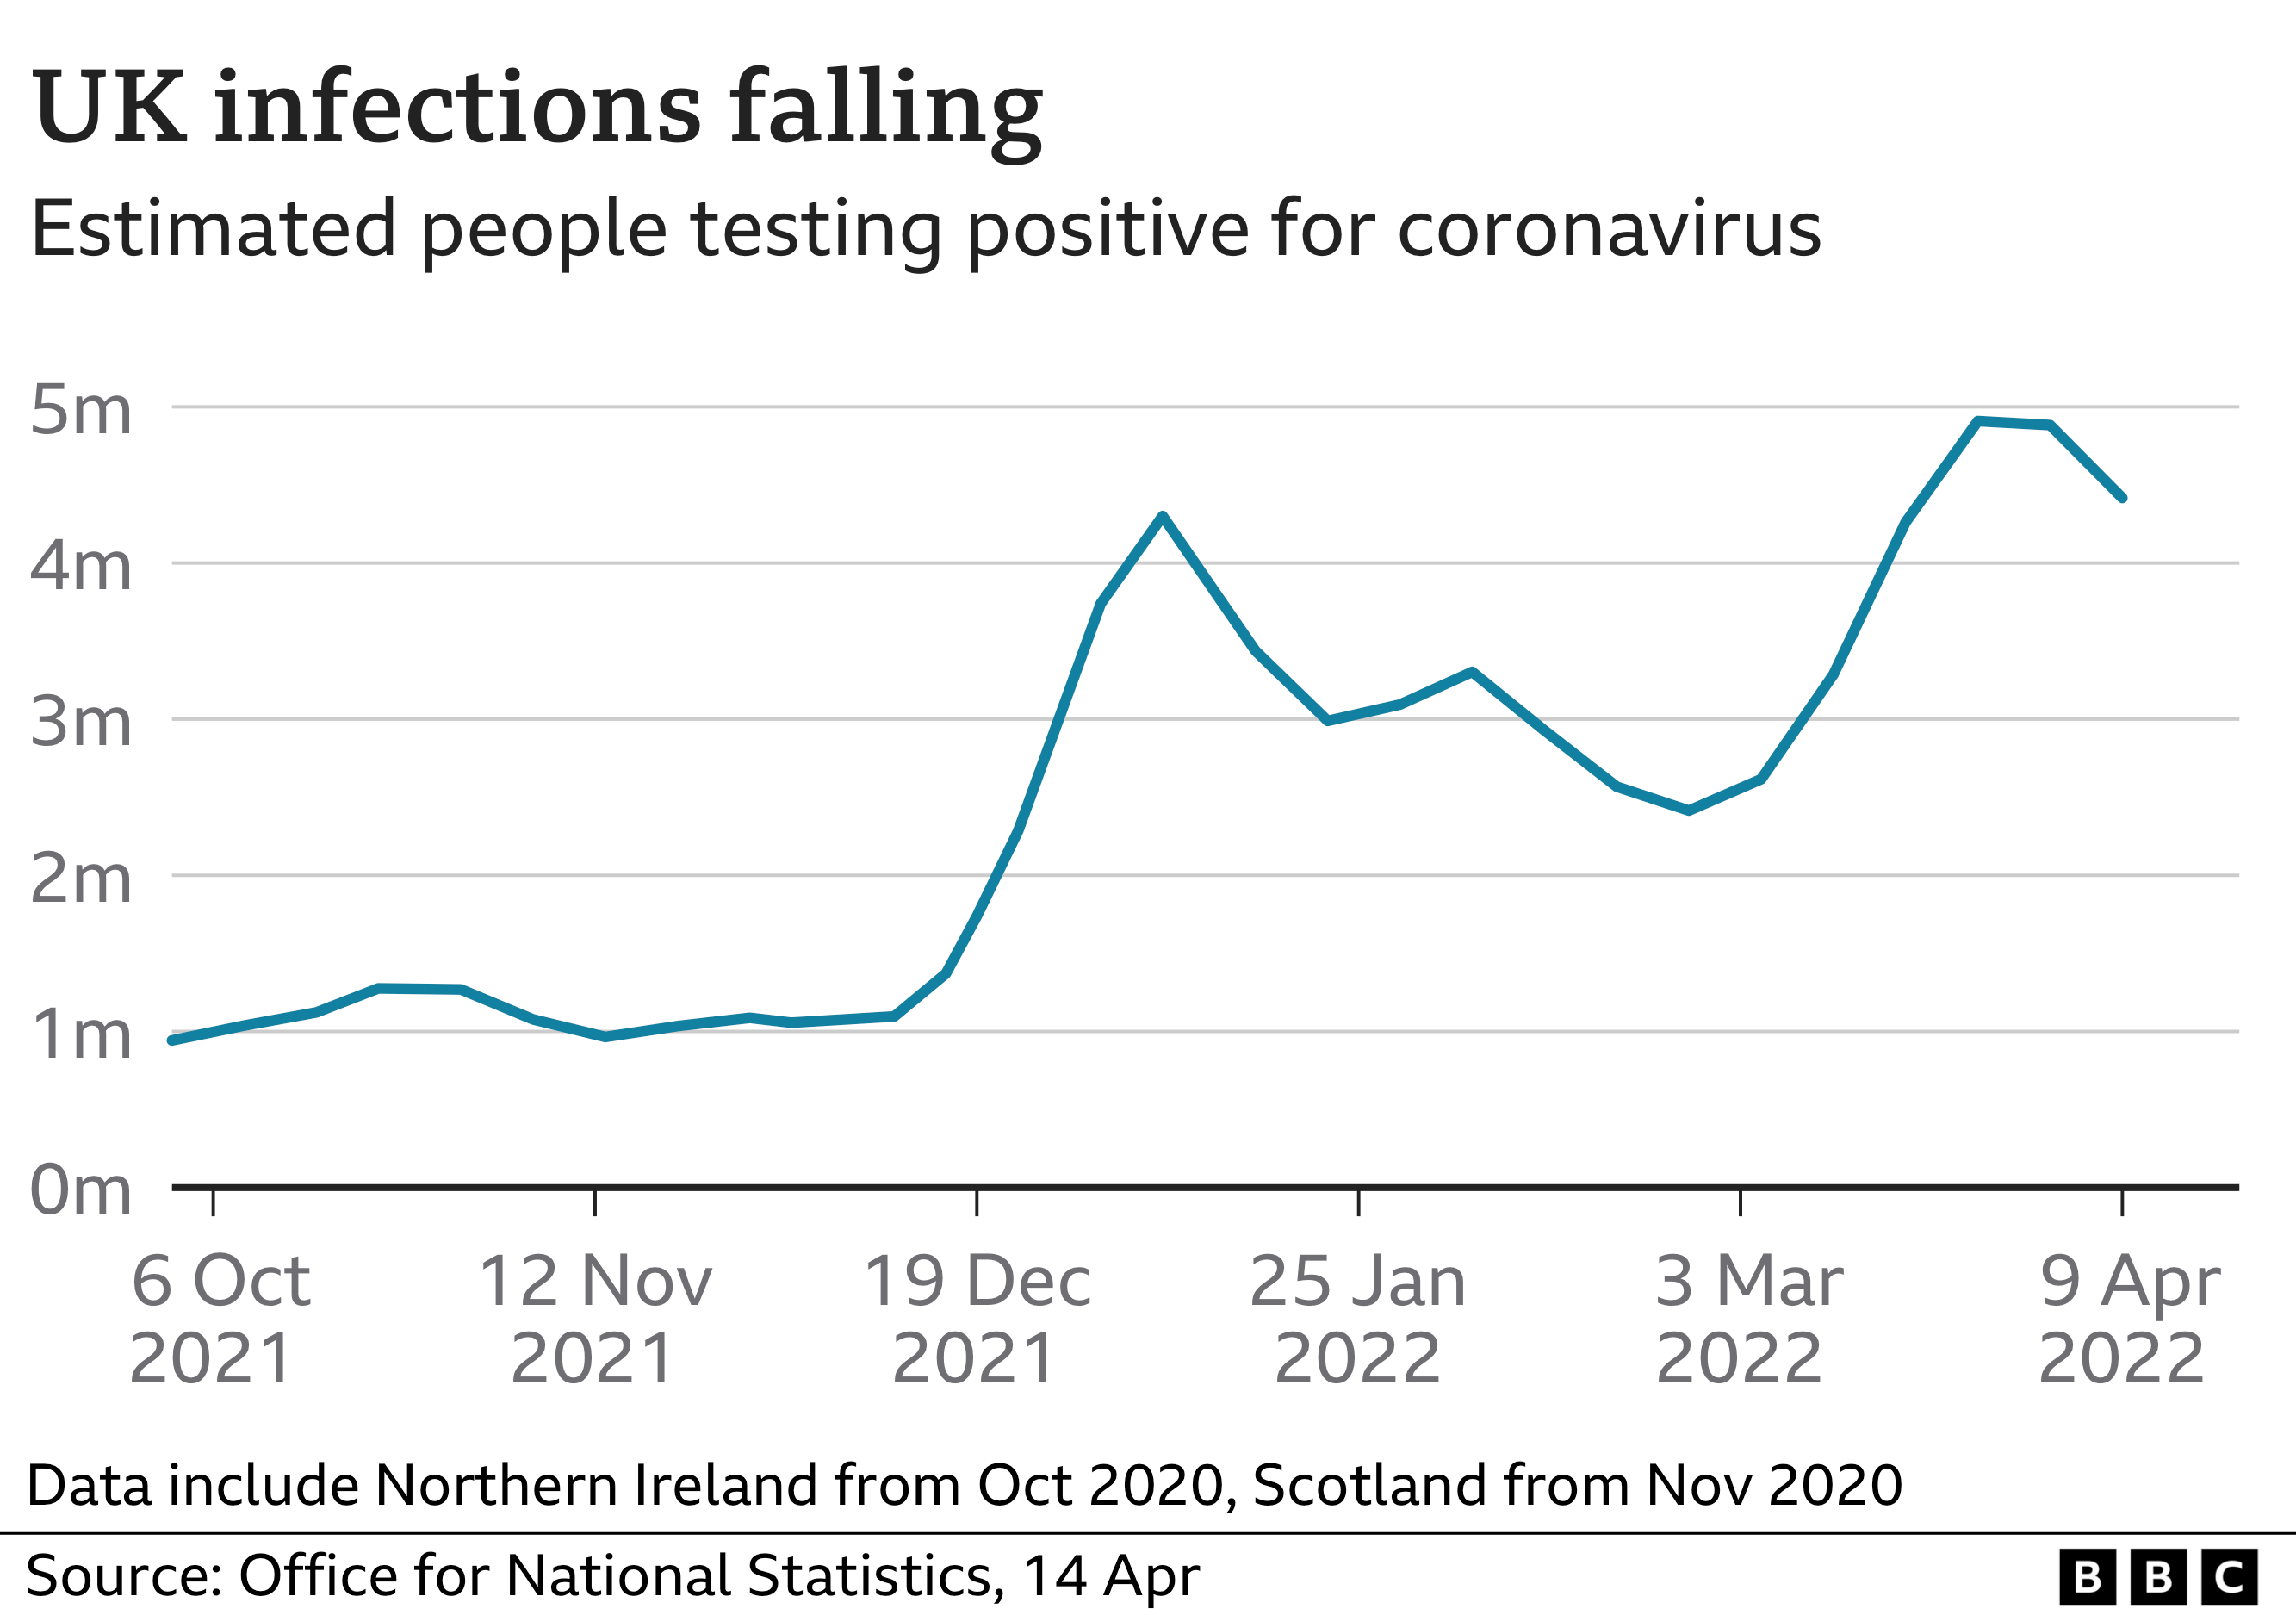 Covid levels starting to fall in UK, says ONS   BBC News